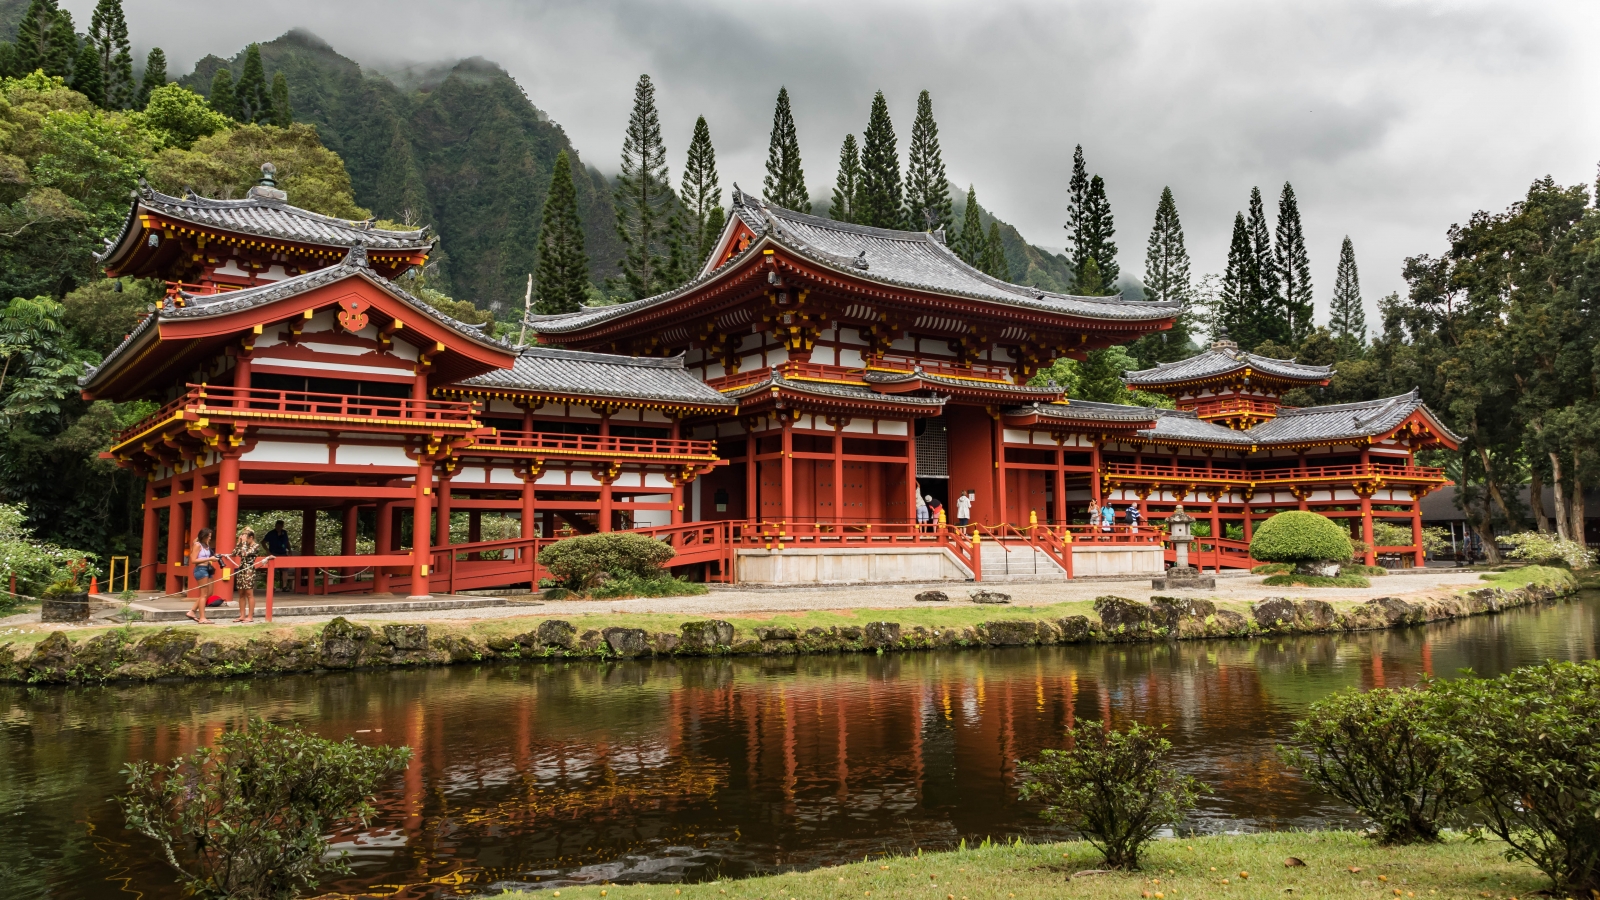 Byodo-In Temple, Oahu Hawaii, is a non-practicing Buddhist temple in the Valley of the Temples. Visitors of all faiths worship, meditate, and enjoy its beauty.